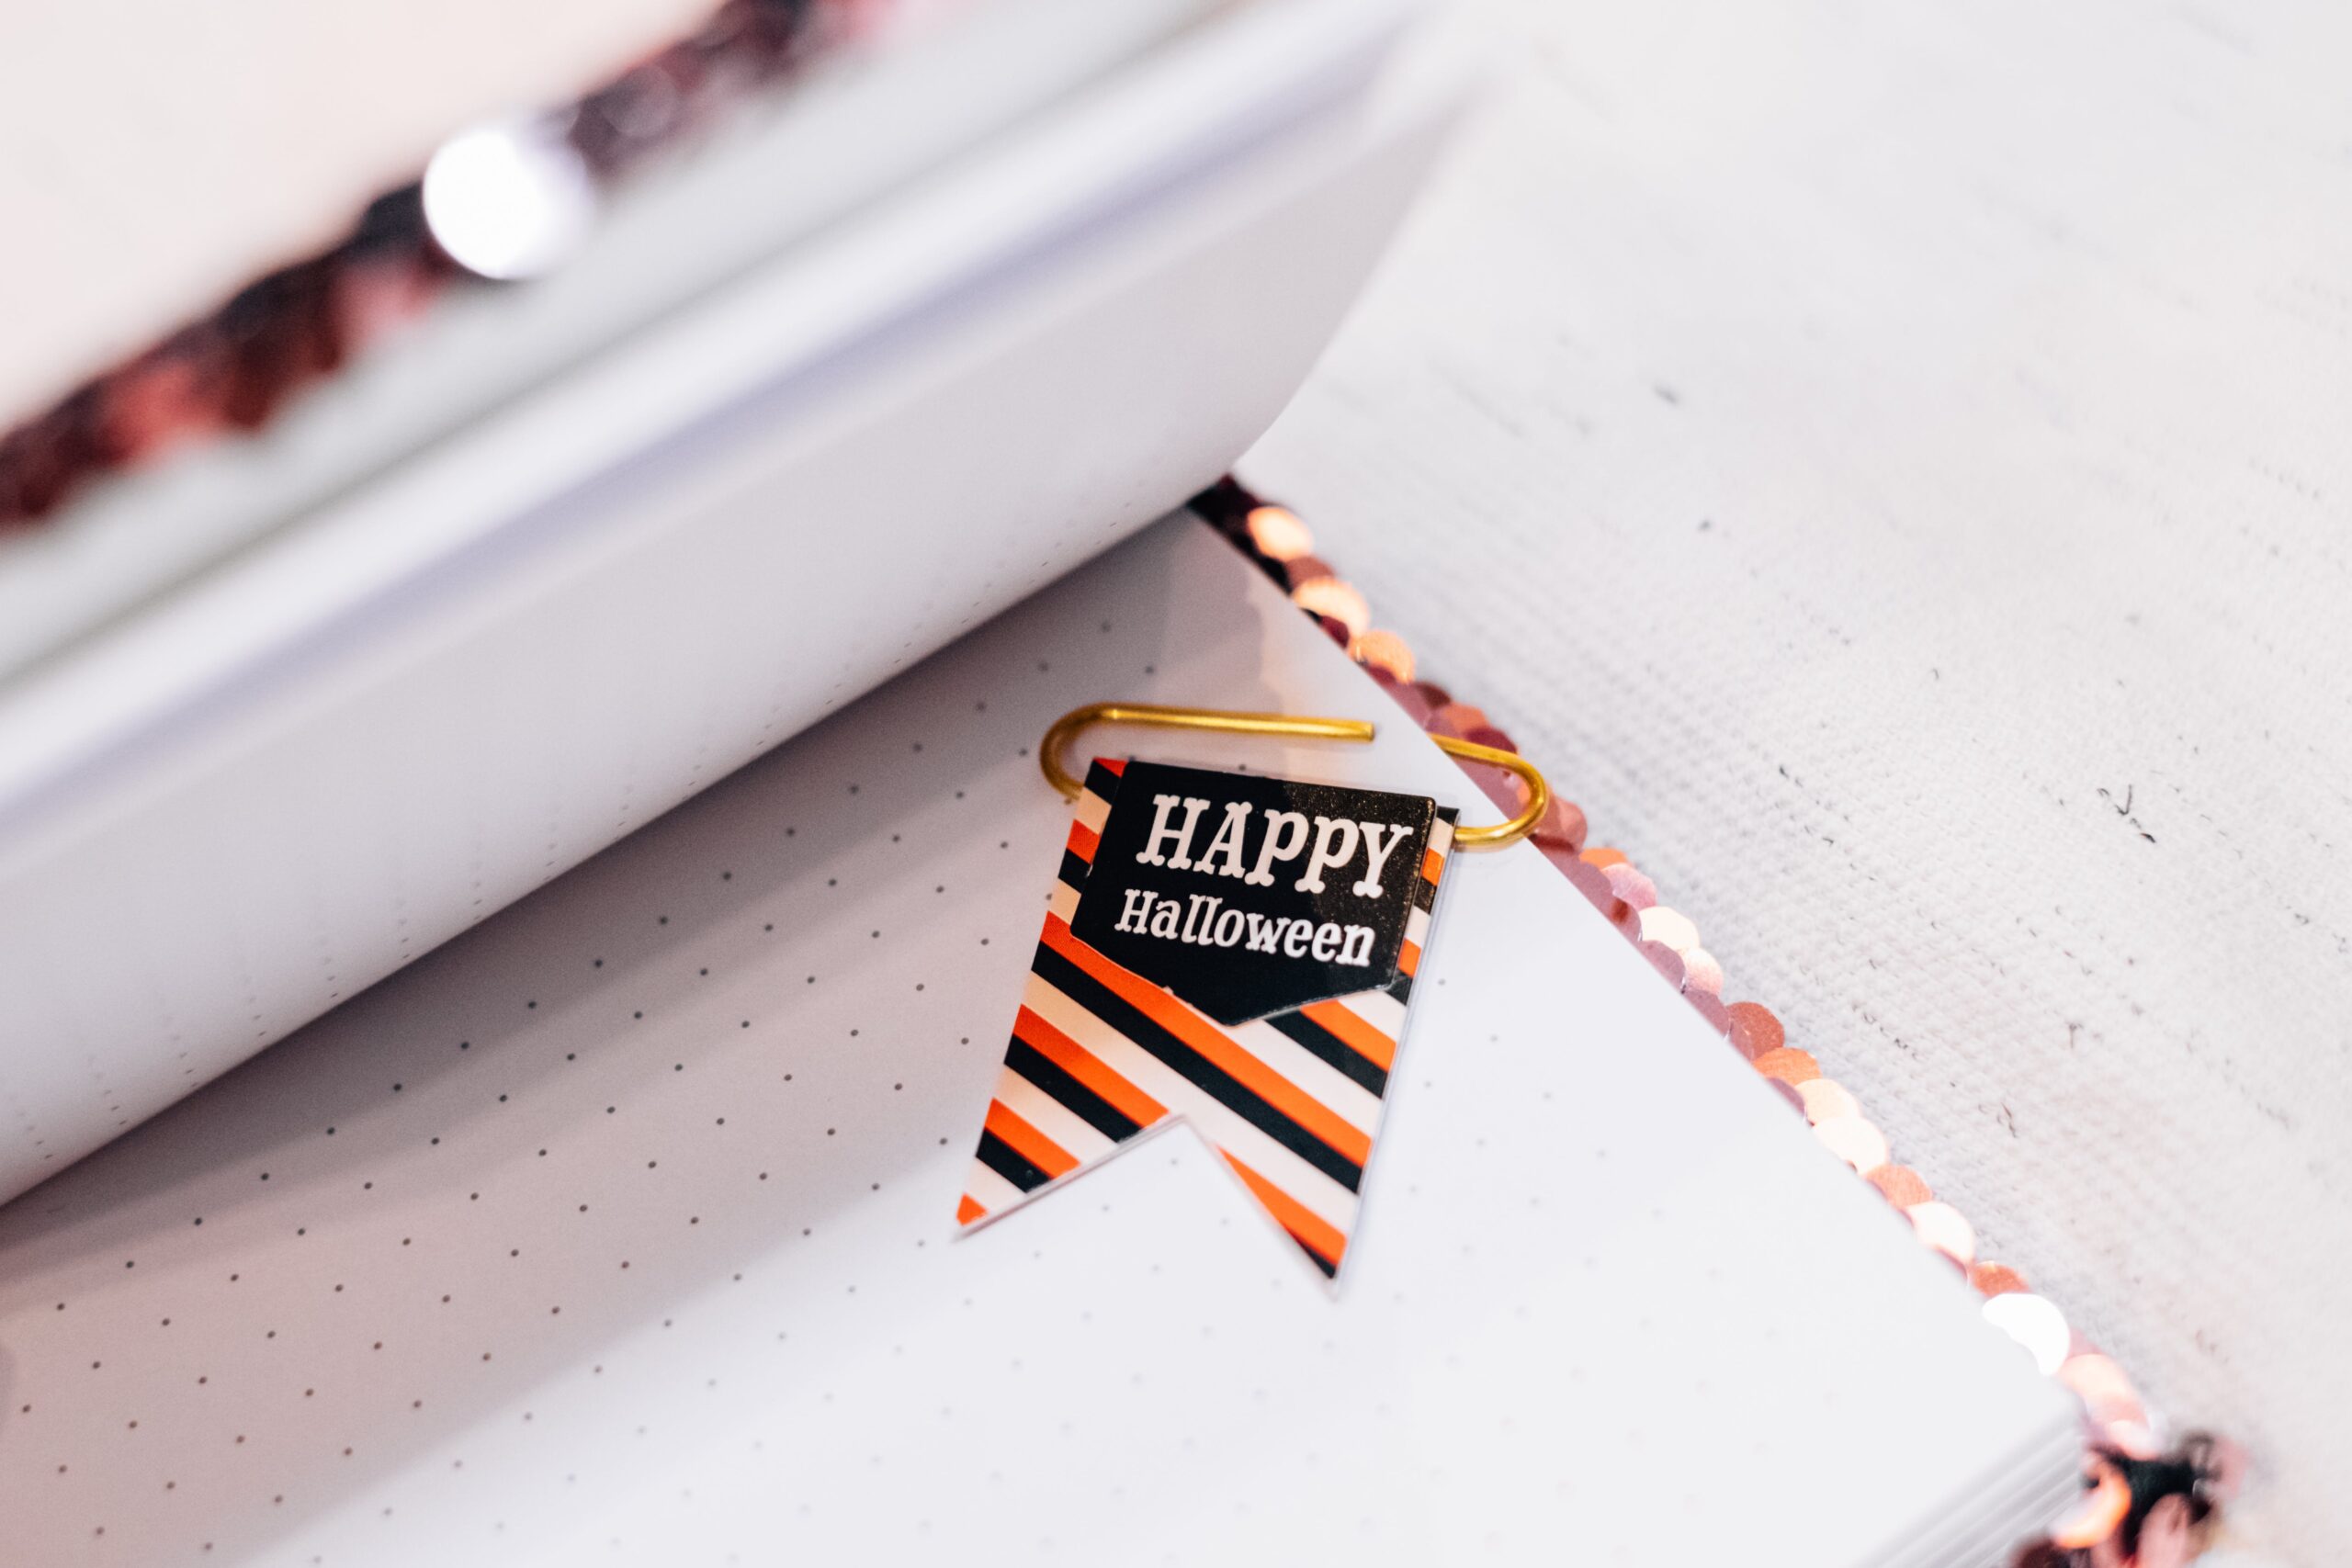 Happy Halloween banner on paperclip